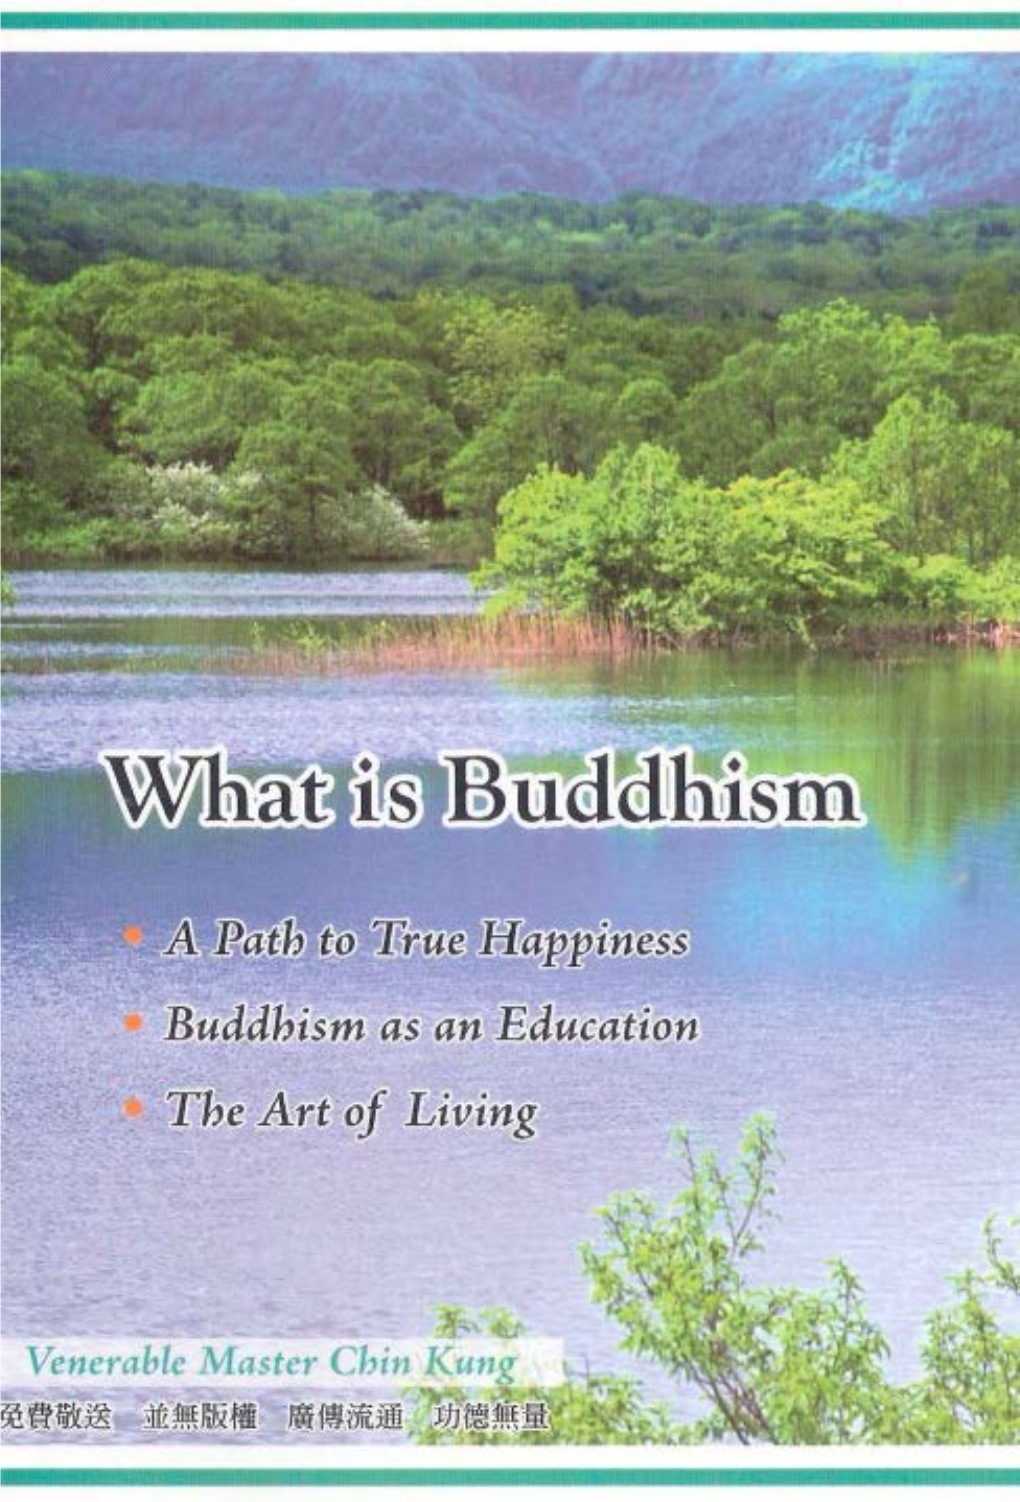 Buddha's Teachings. This Is When Our Cultivation Has Improved